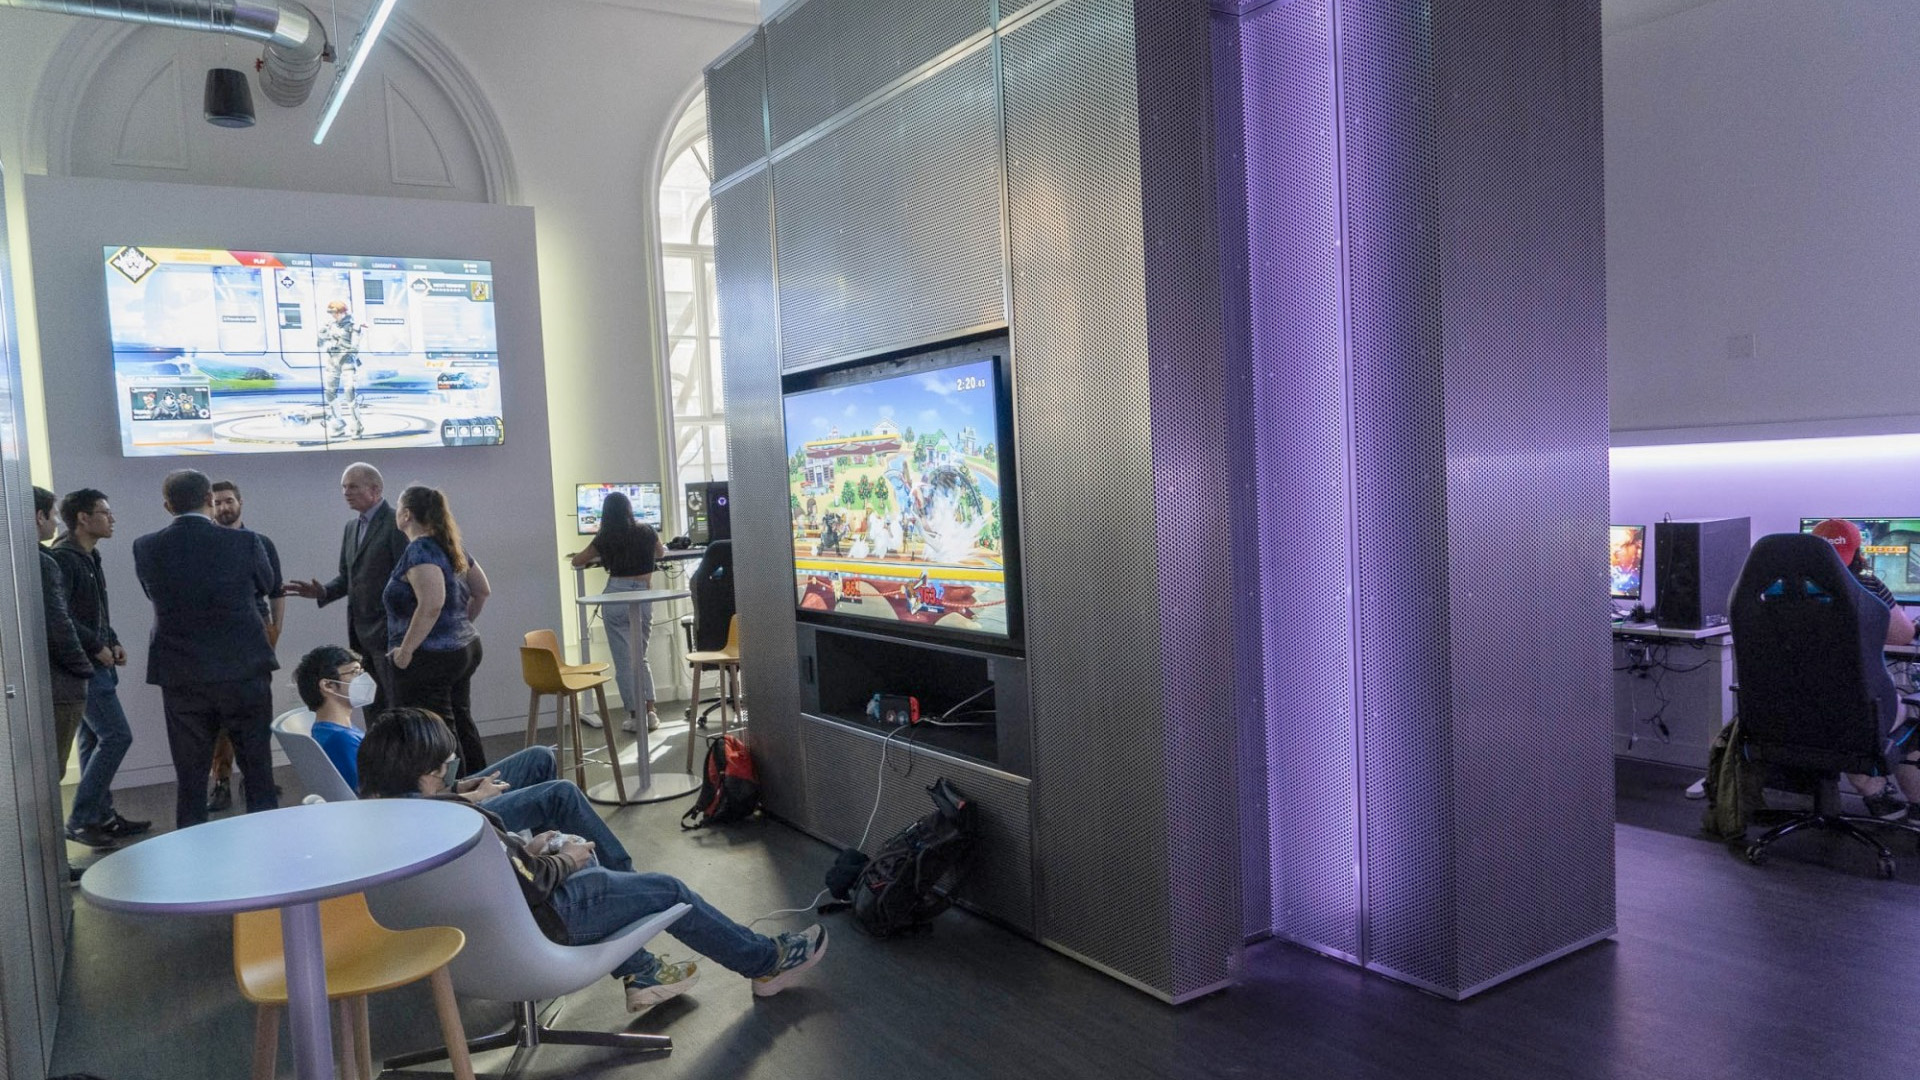 A view of the new Wallach Esports lounge that has students gathered around big screen tvs that are displaying video games.